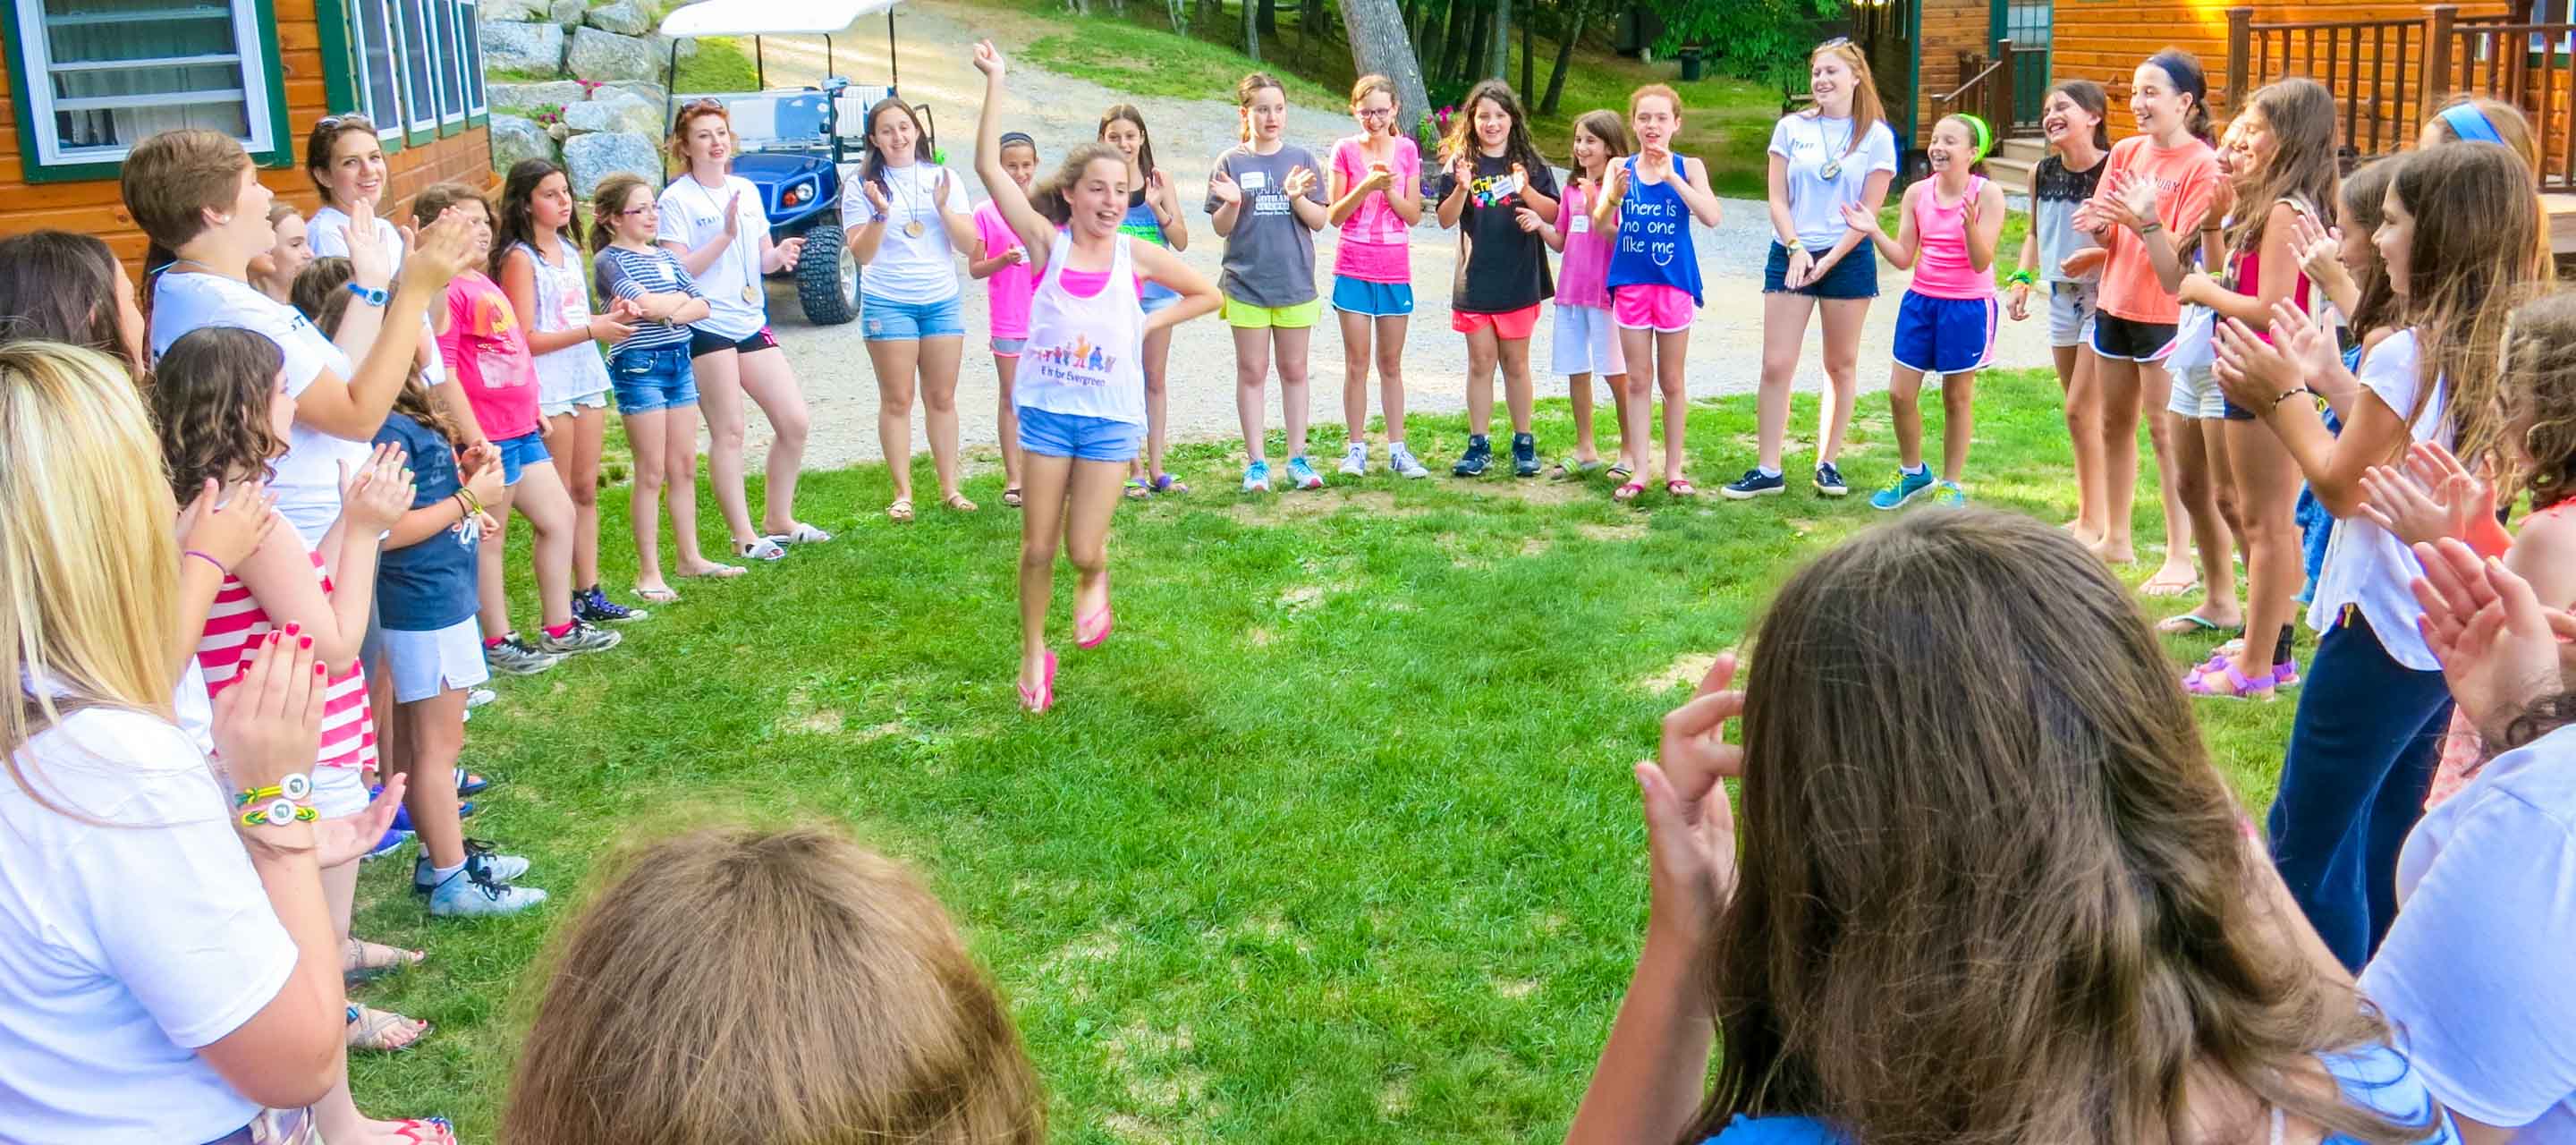 Campers in a circle and a girl dancing in the middle